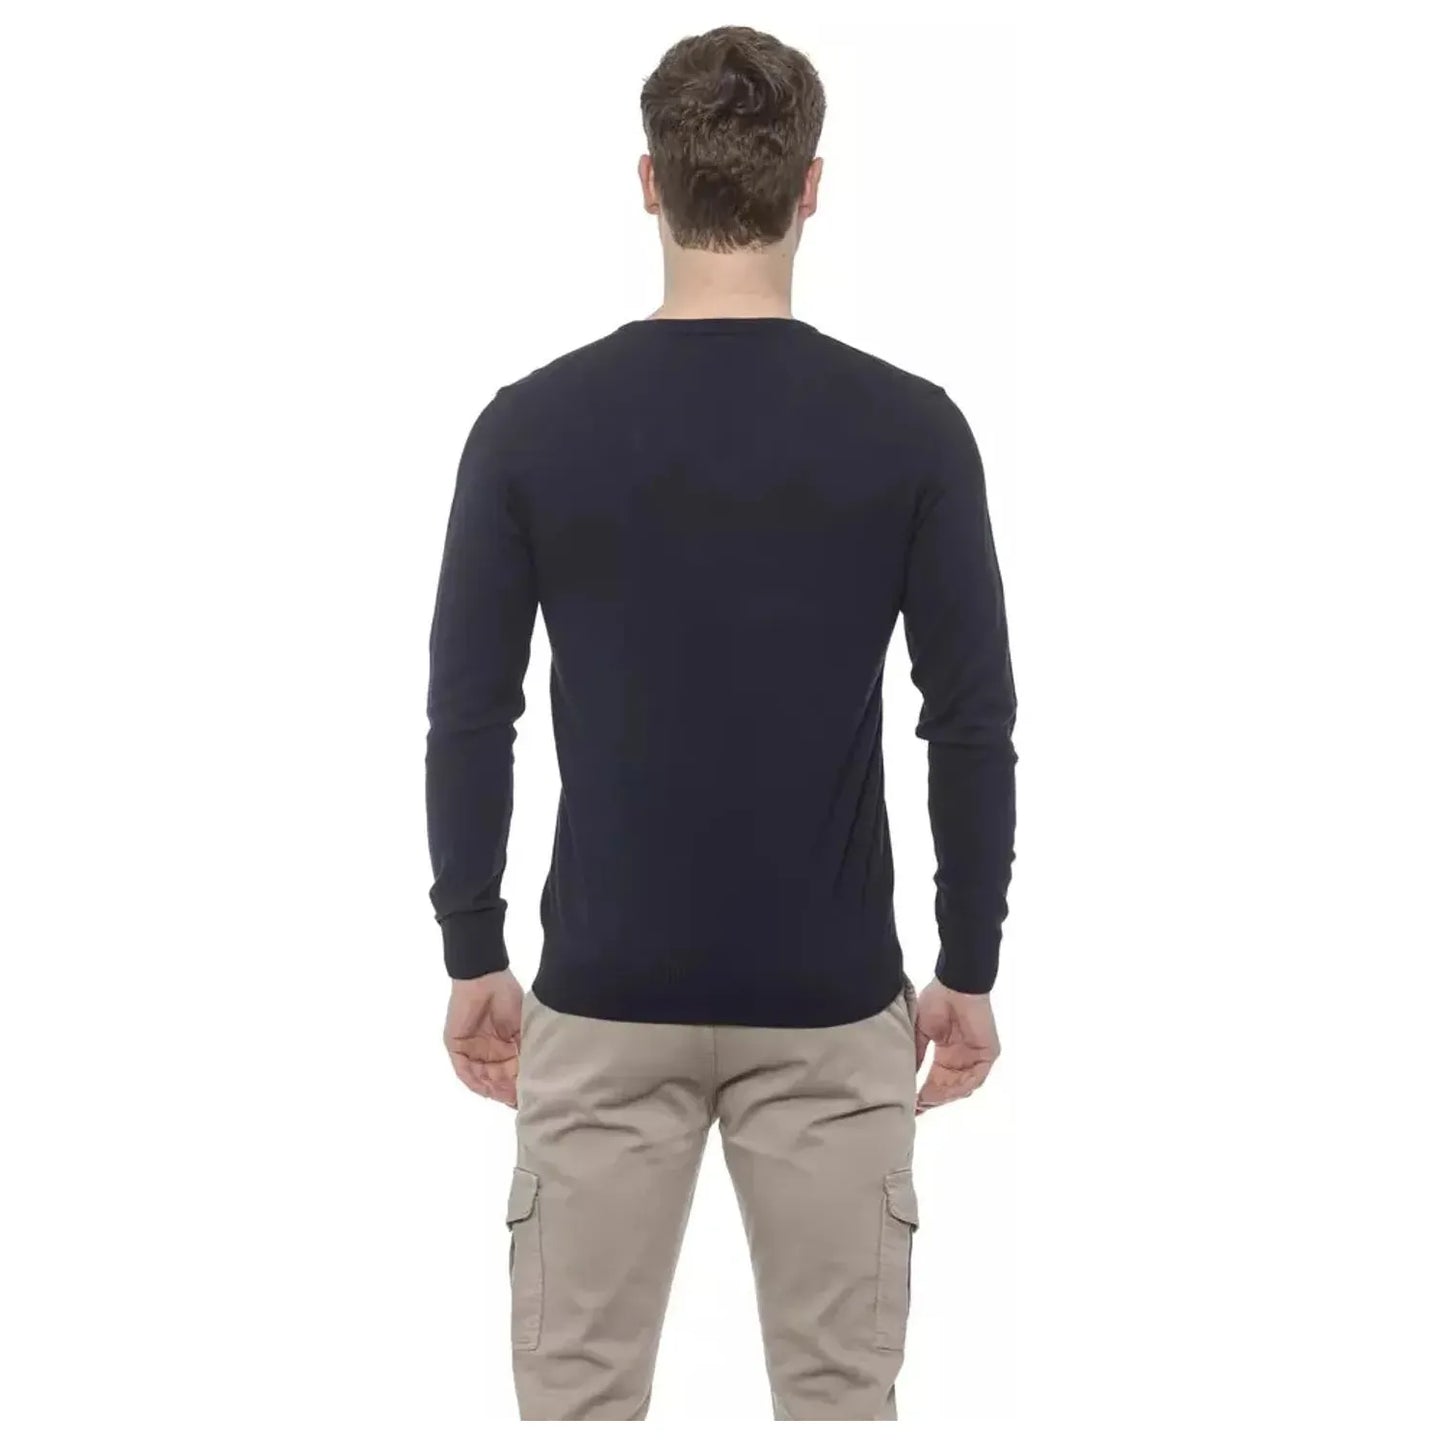 Conte of Florence Elegant V-Neck Cotton Sweater for Men prussianblue-sweater-1